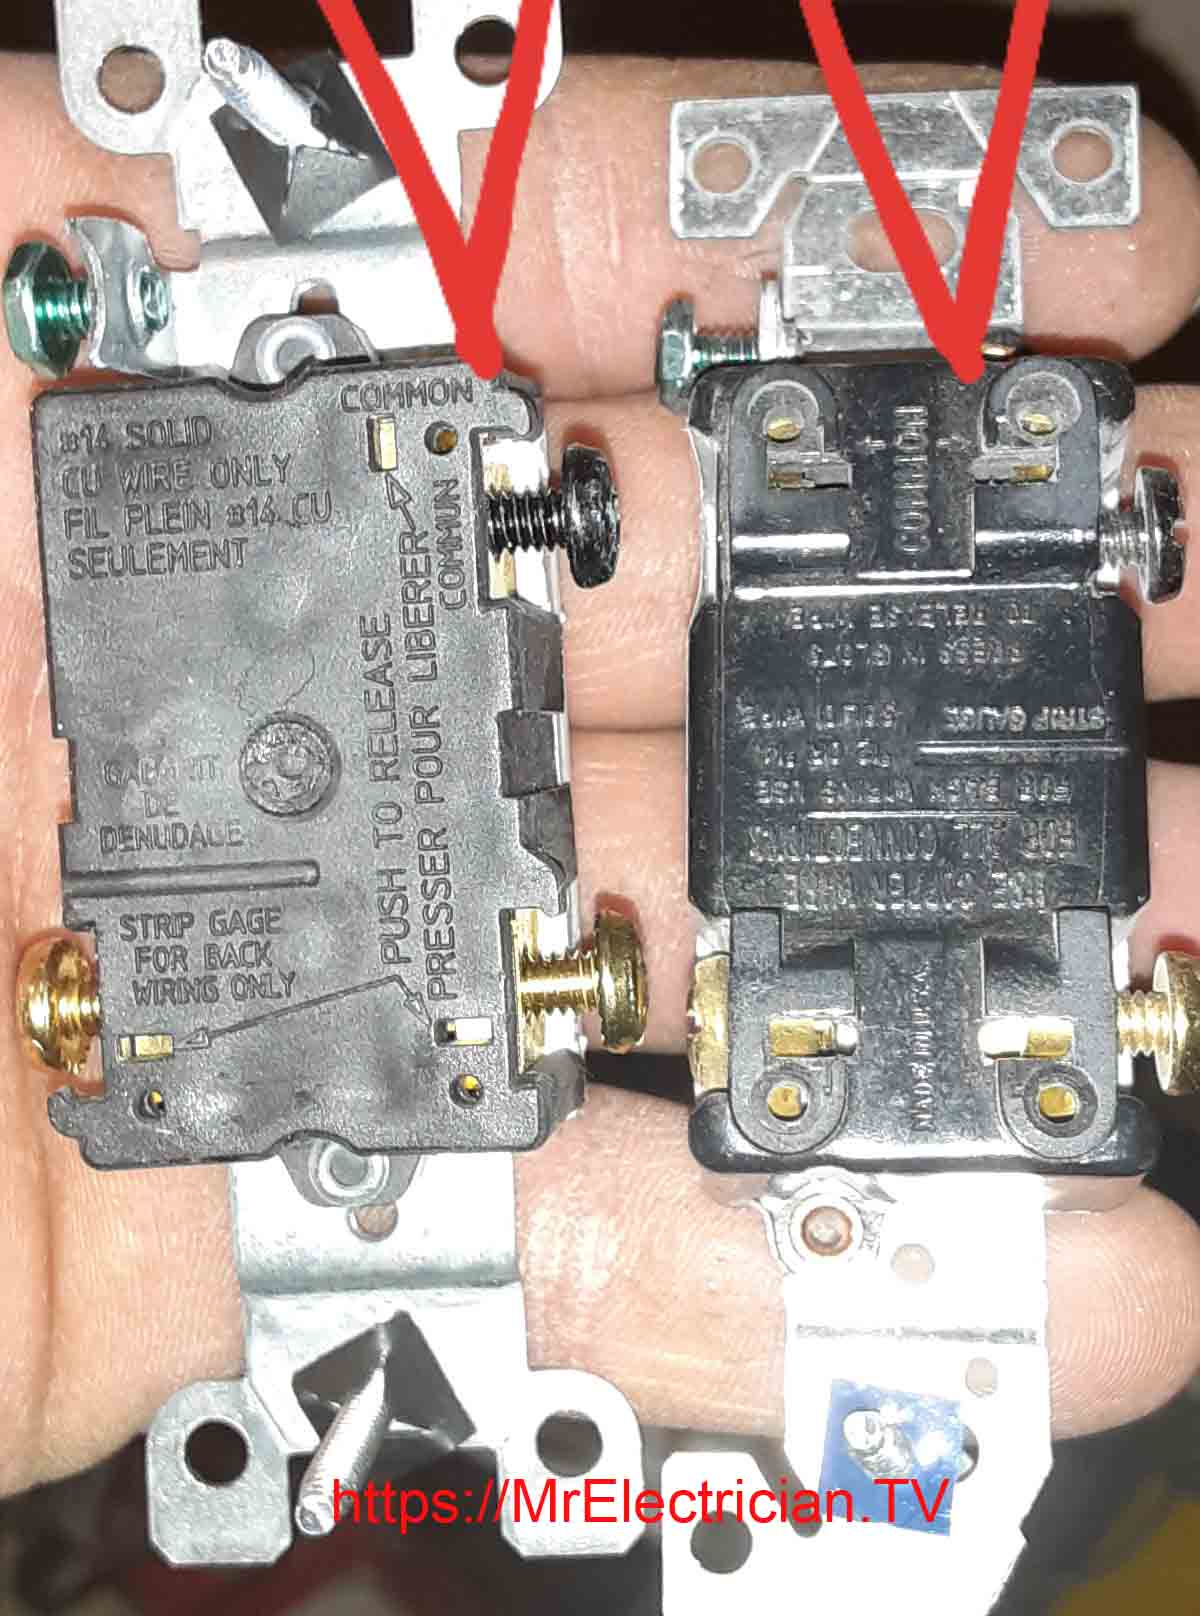 The back side of two three-way switches with arrows pointing to the common terminal